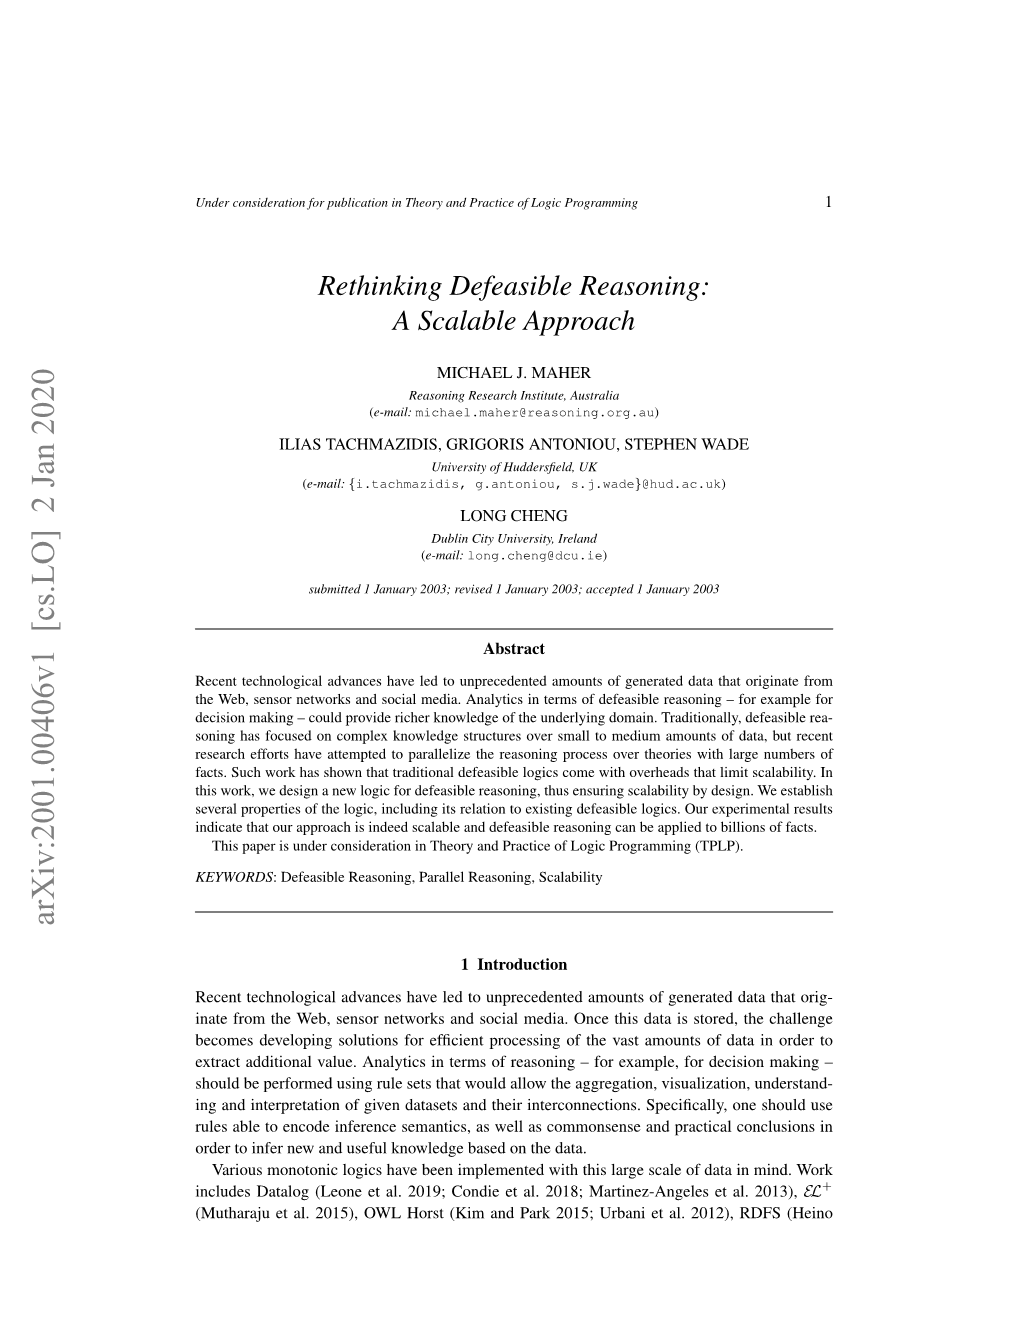 Rethinking Defeasible Reasoning: a Scalable Approach